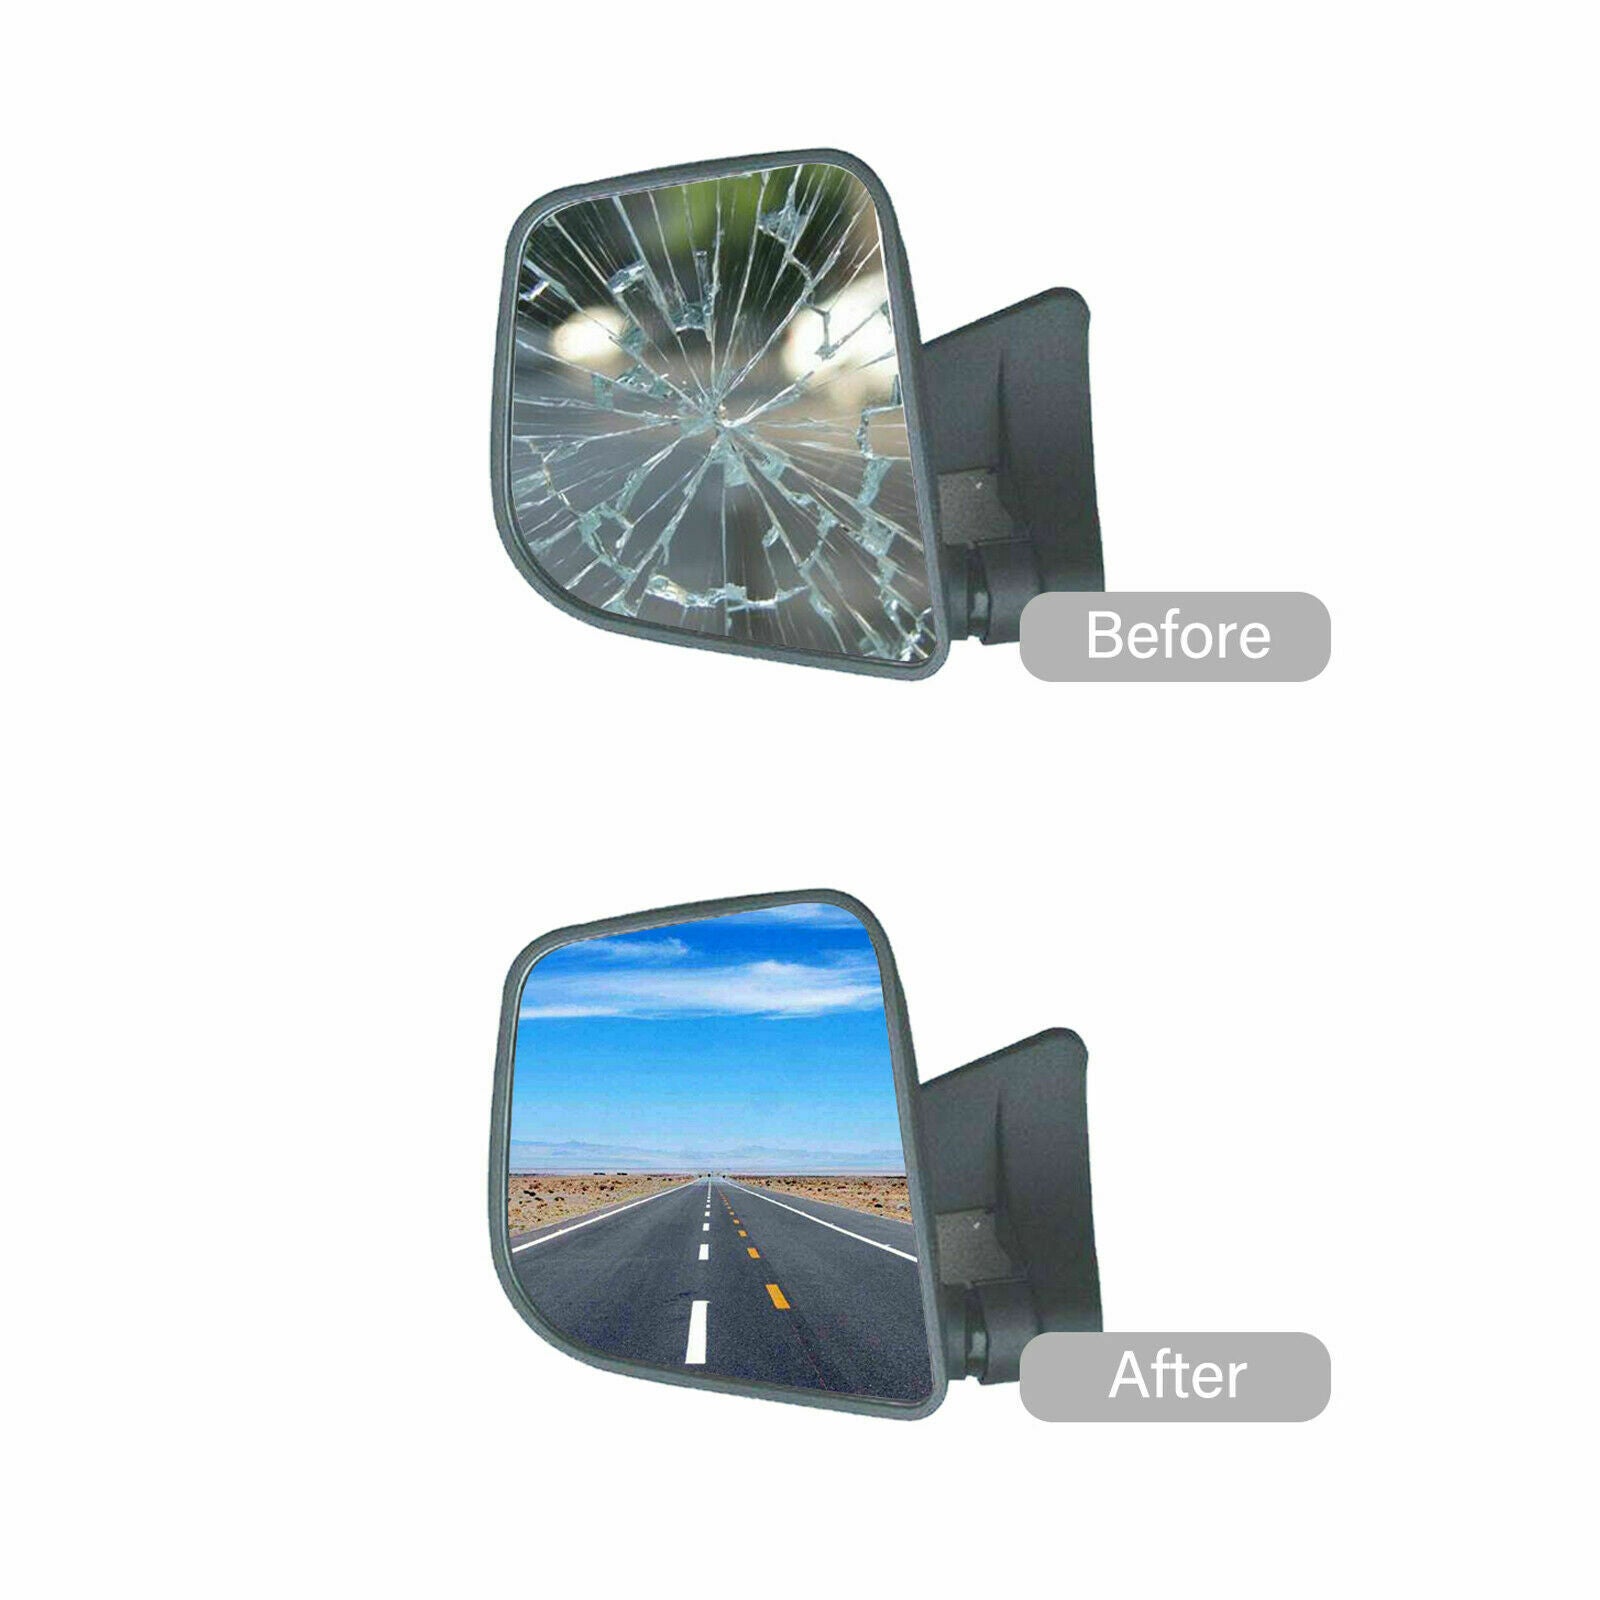 WLLW Replacement Mirror Glass for 2007-2012 Nissan Sentra, Driver Left Side LH/Passenger Right Side RH/The Both Sides Flat Convex M-0061